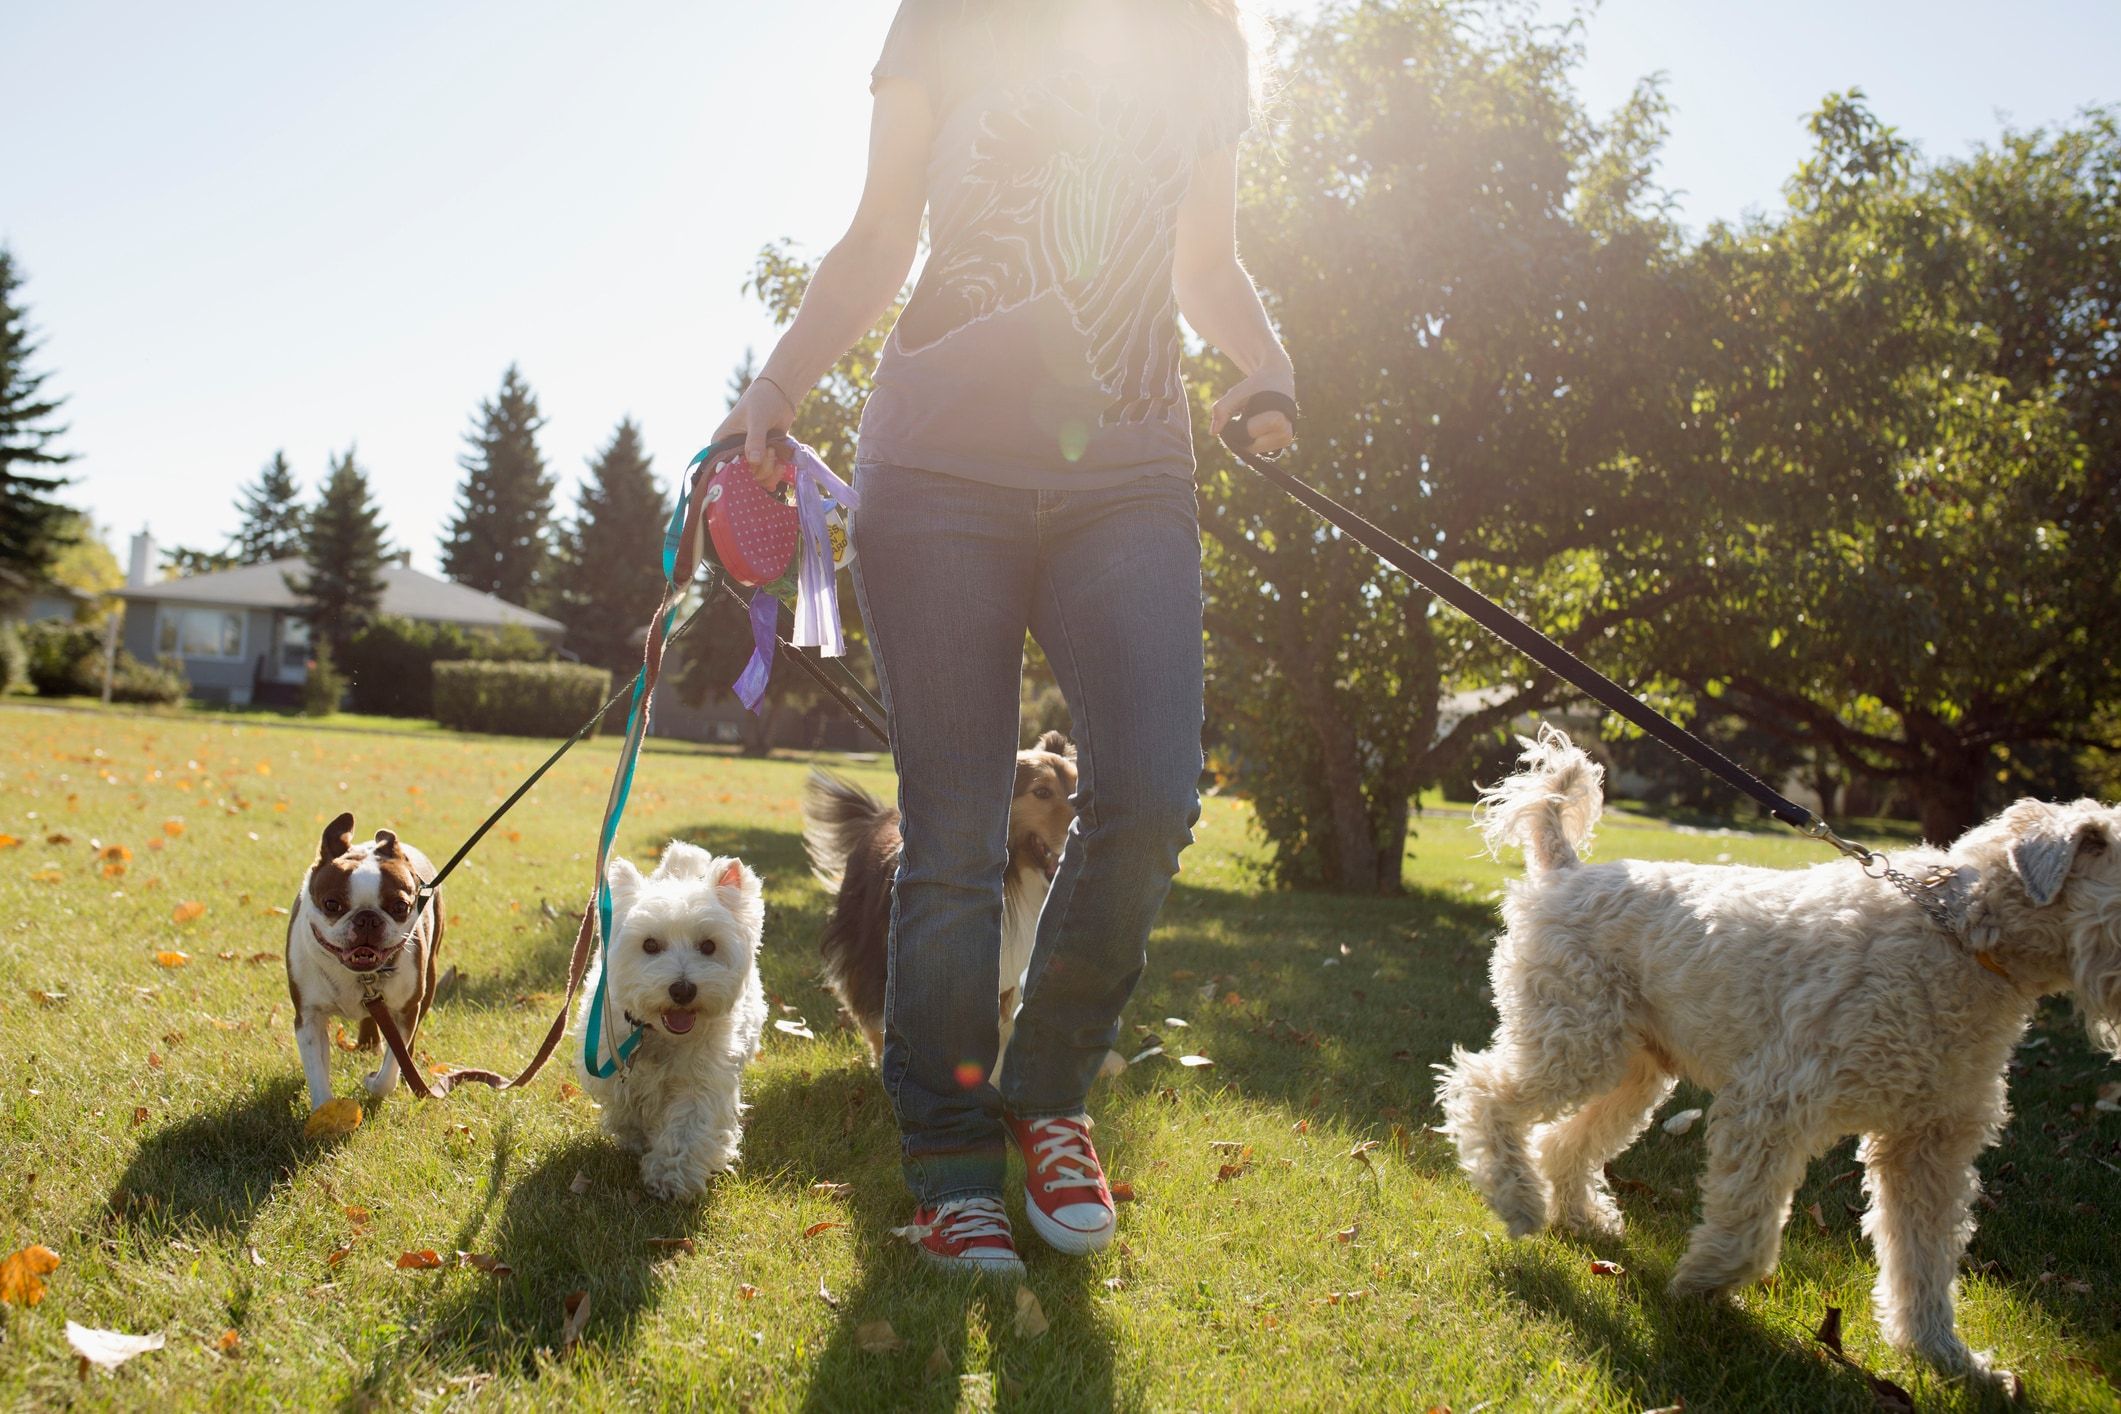 Want to become a dog walker? Follow these expert steps on how to do it